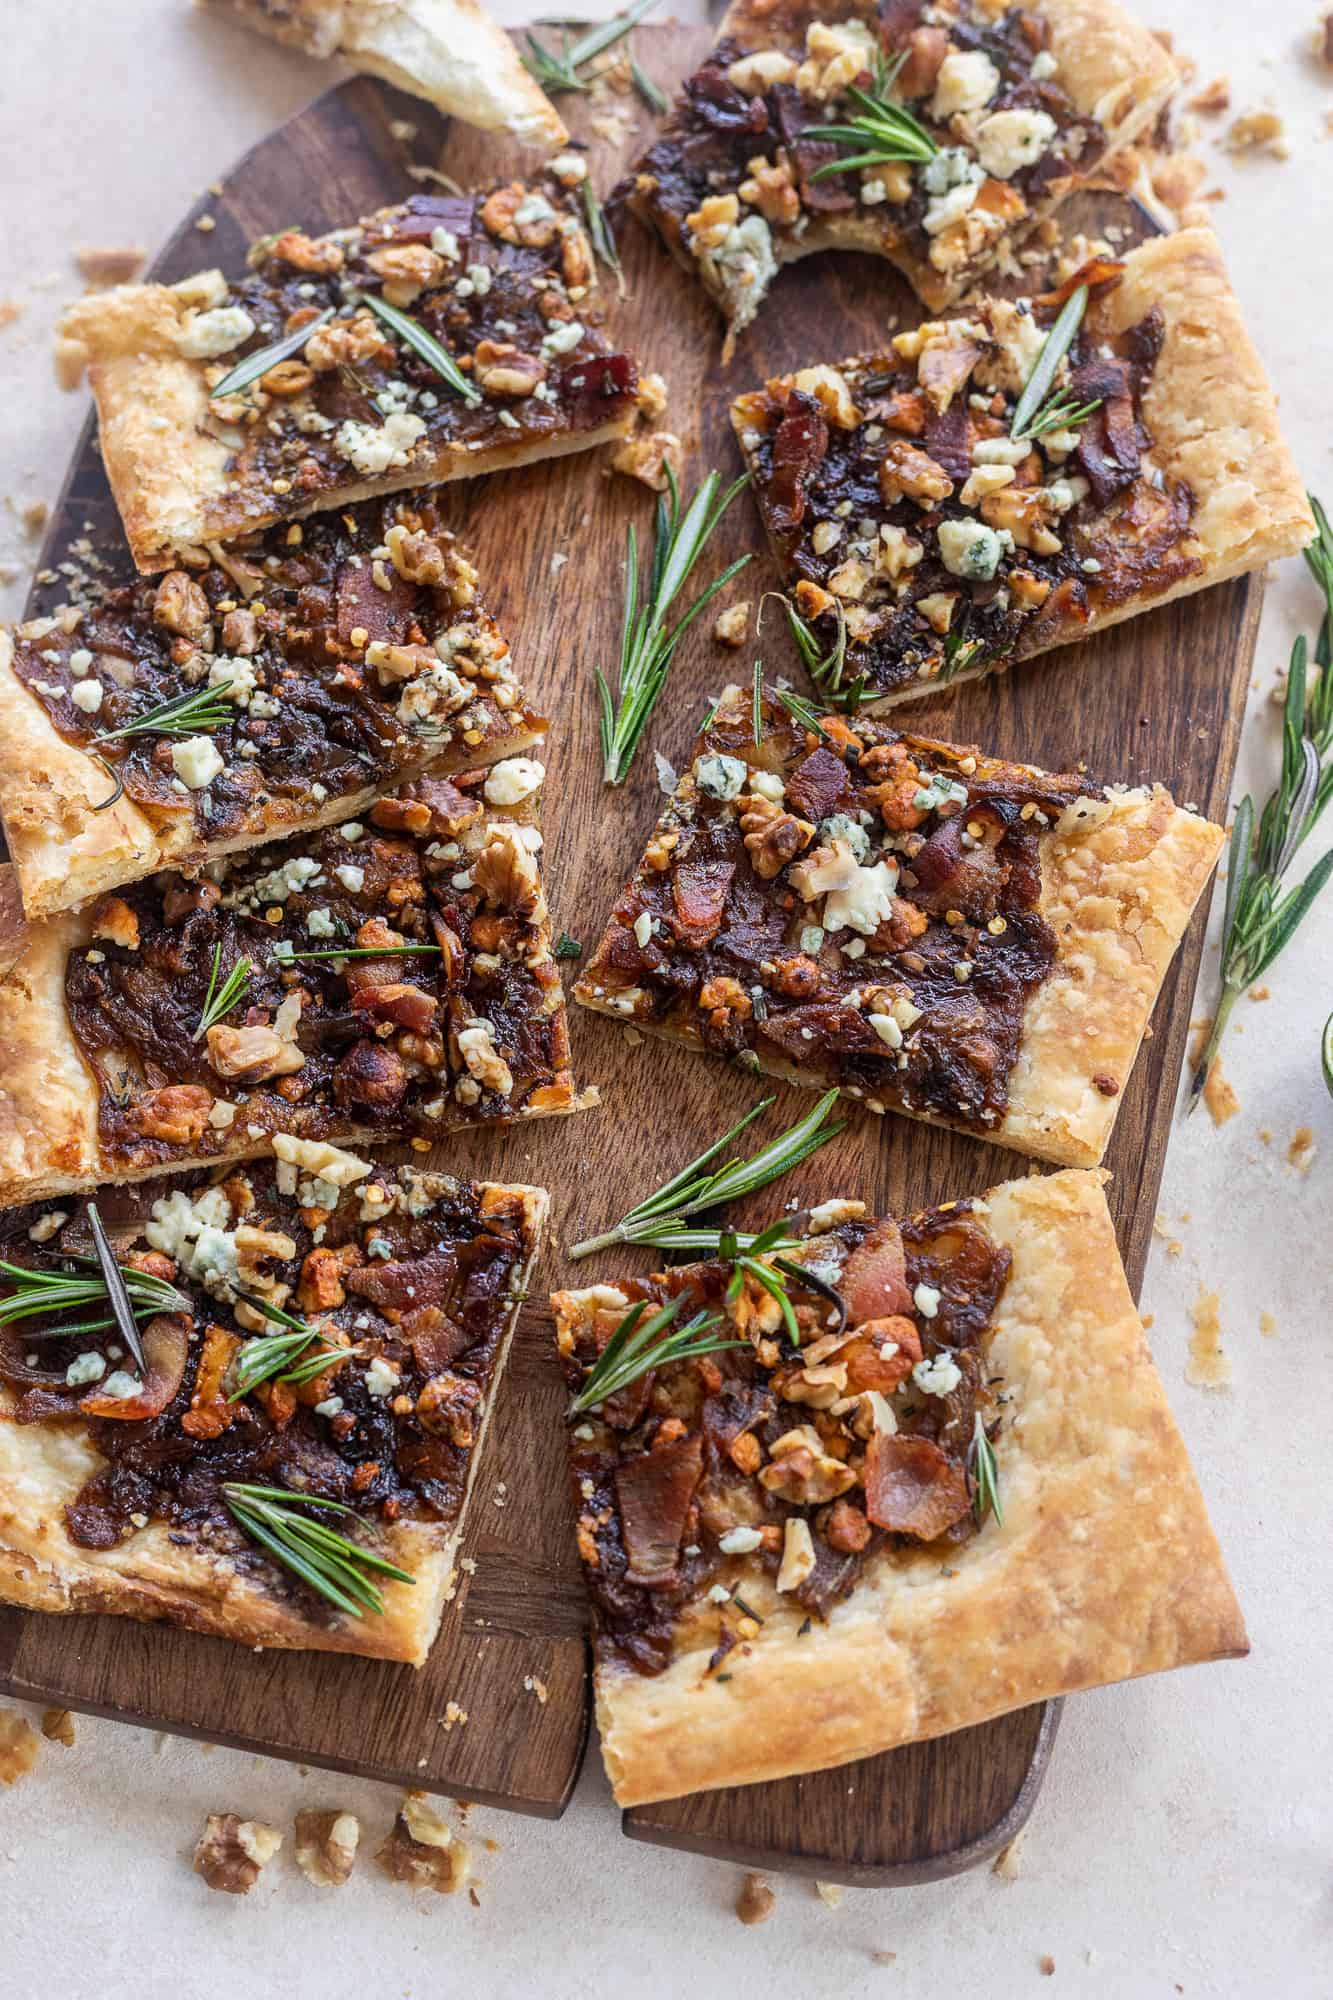 Caramelized Onion Puff Pastry with bacon and gorgonzola on a cutting board with rosemary leaves